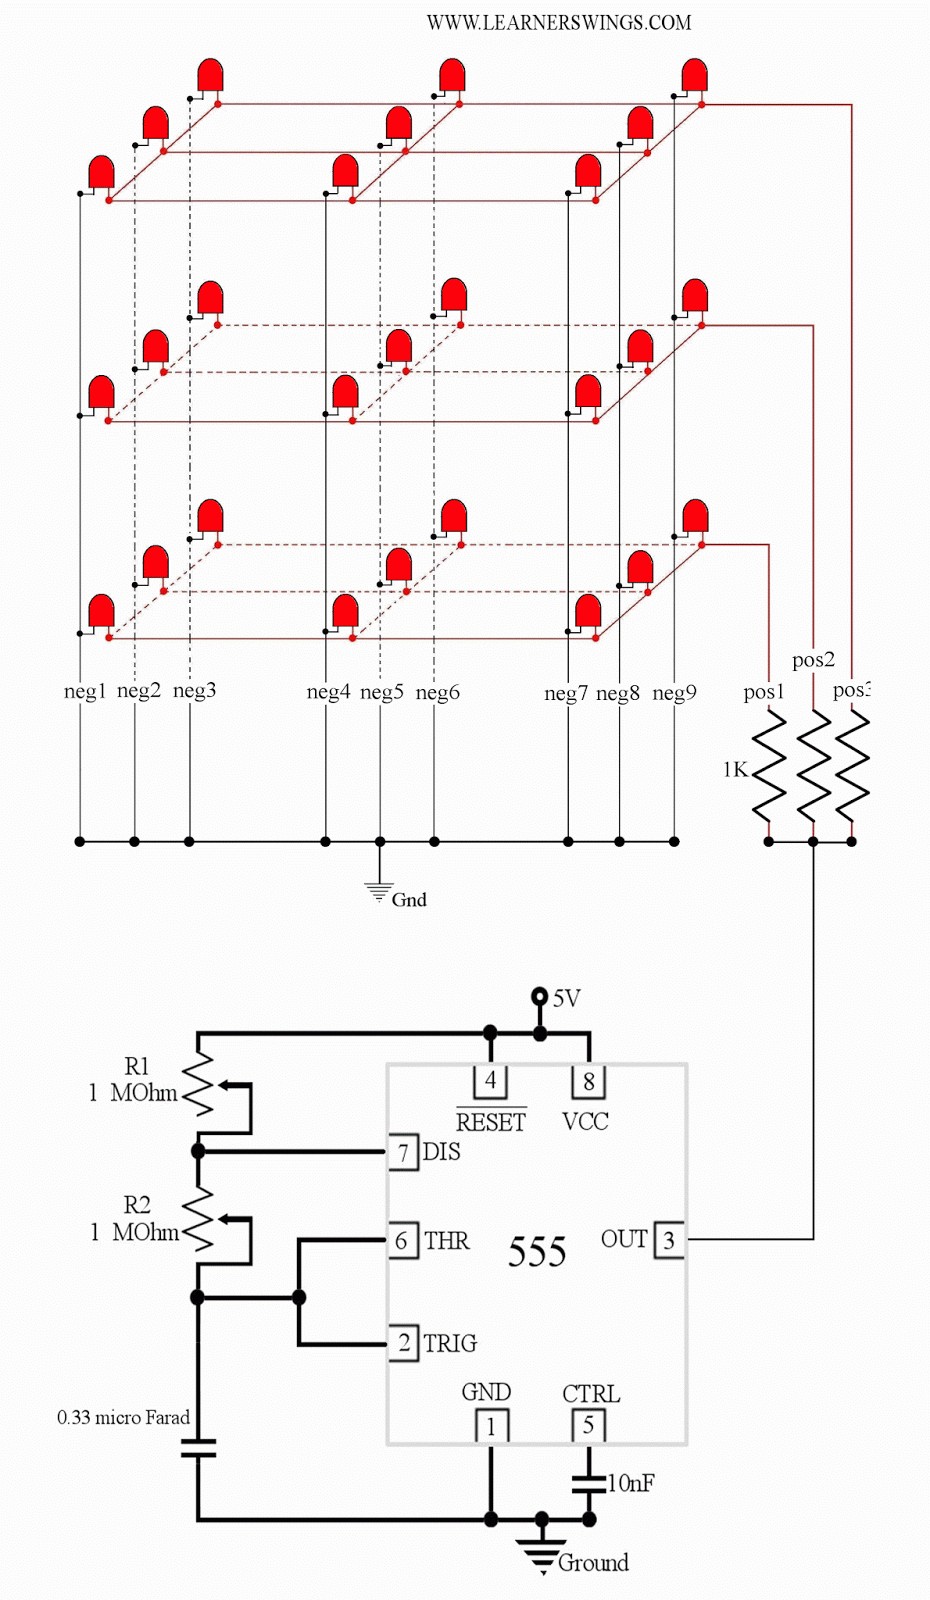 A Low Cost 3 3 3 LED Cube using 555 Timer IC Astable Mode Operation of 555 Read more about circuit at